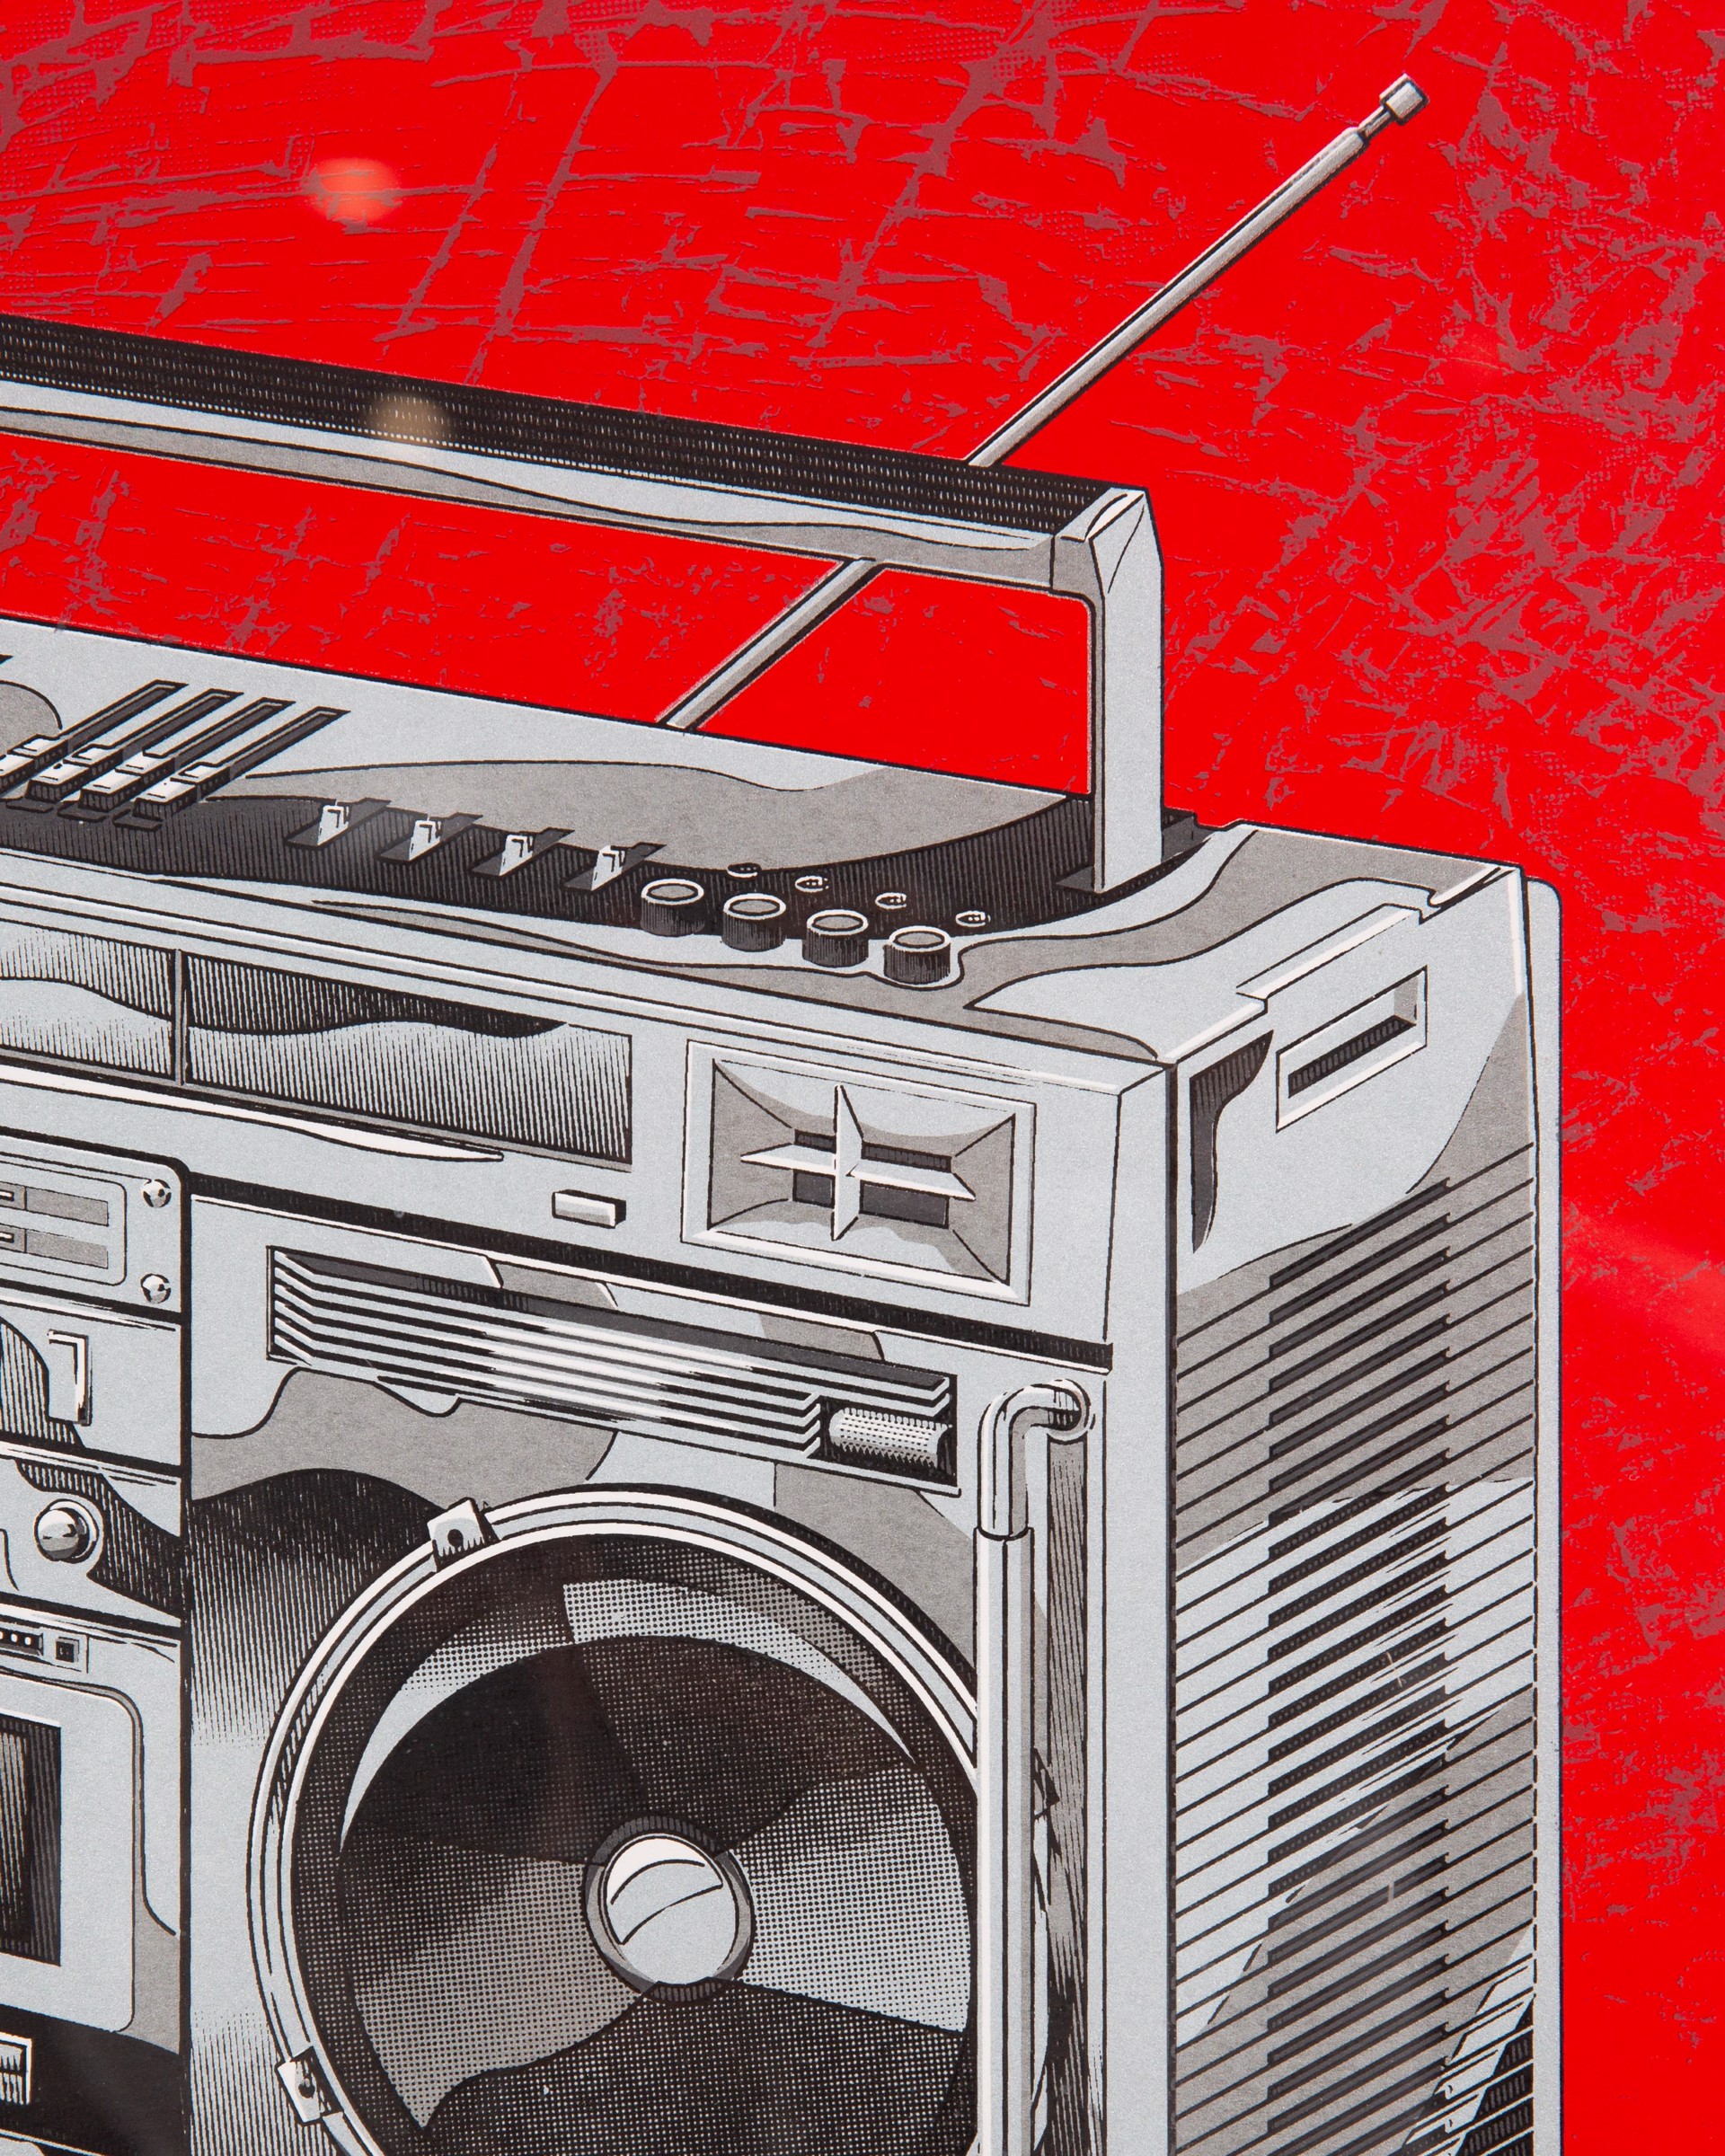 Firecracker Red Box by Lyle Owerko | Boomboxes